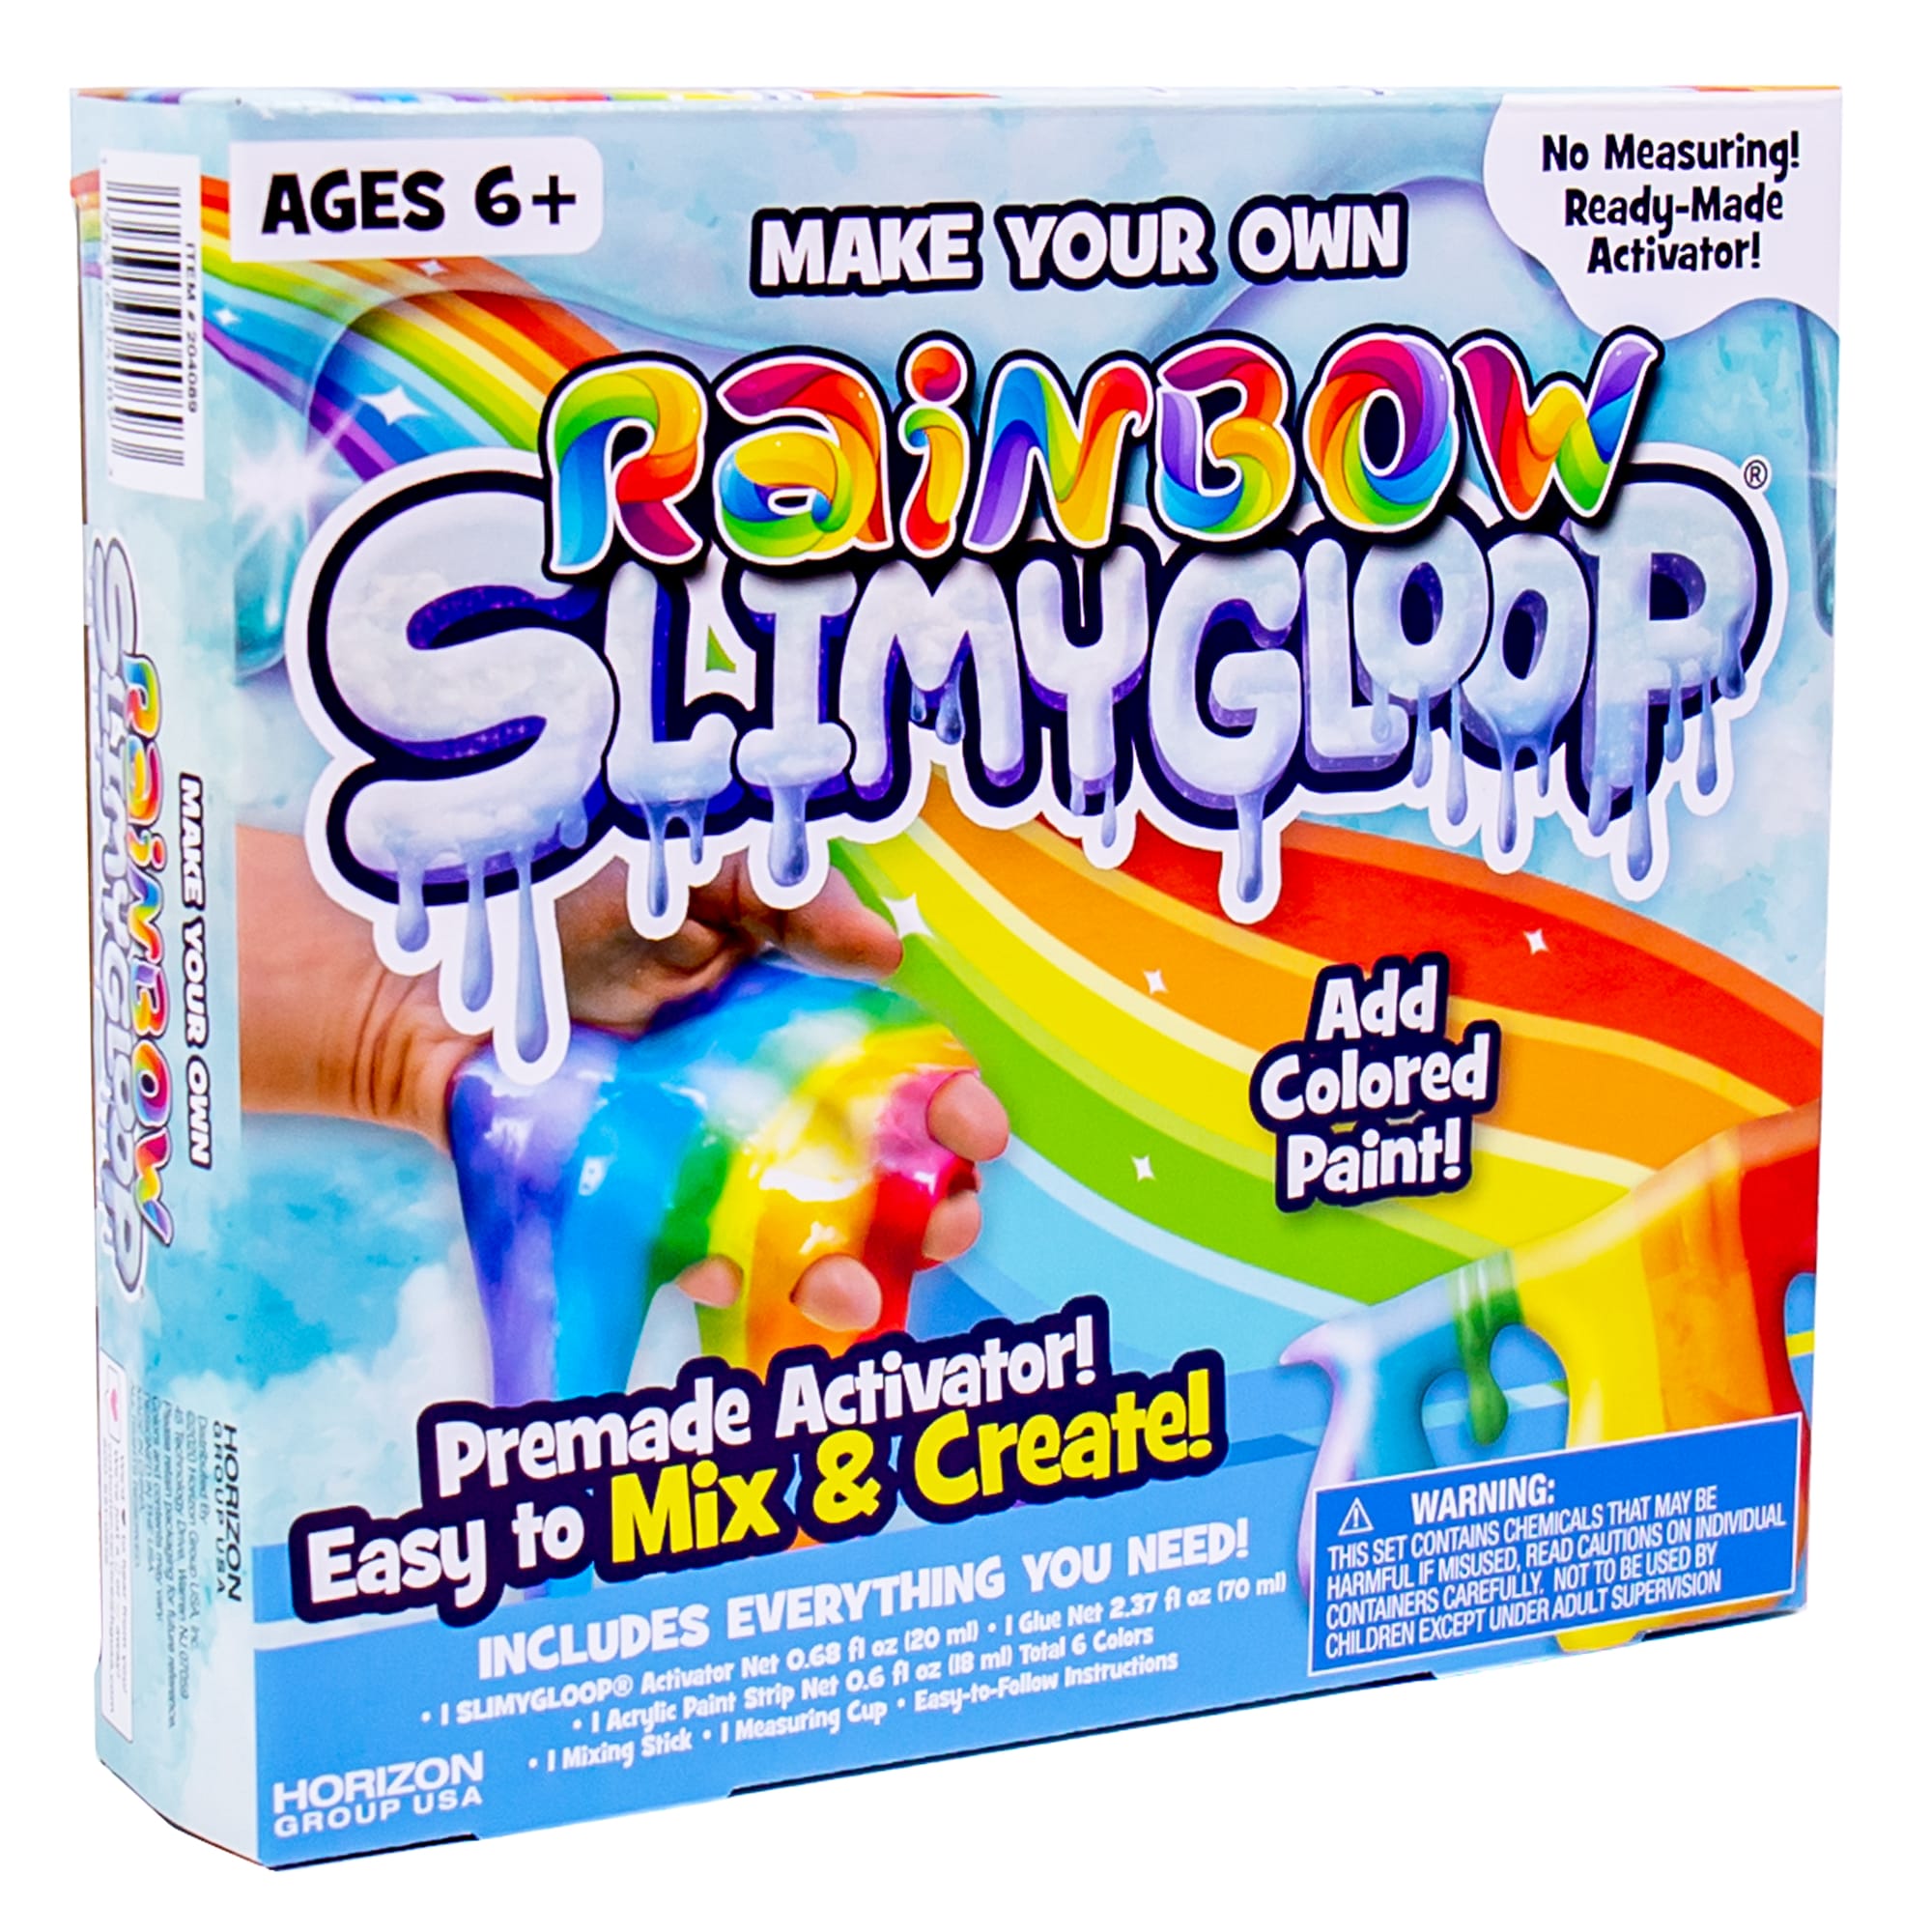 Make Your Own Rainbow Slimygloop: Add Colored Paint!